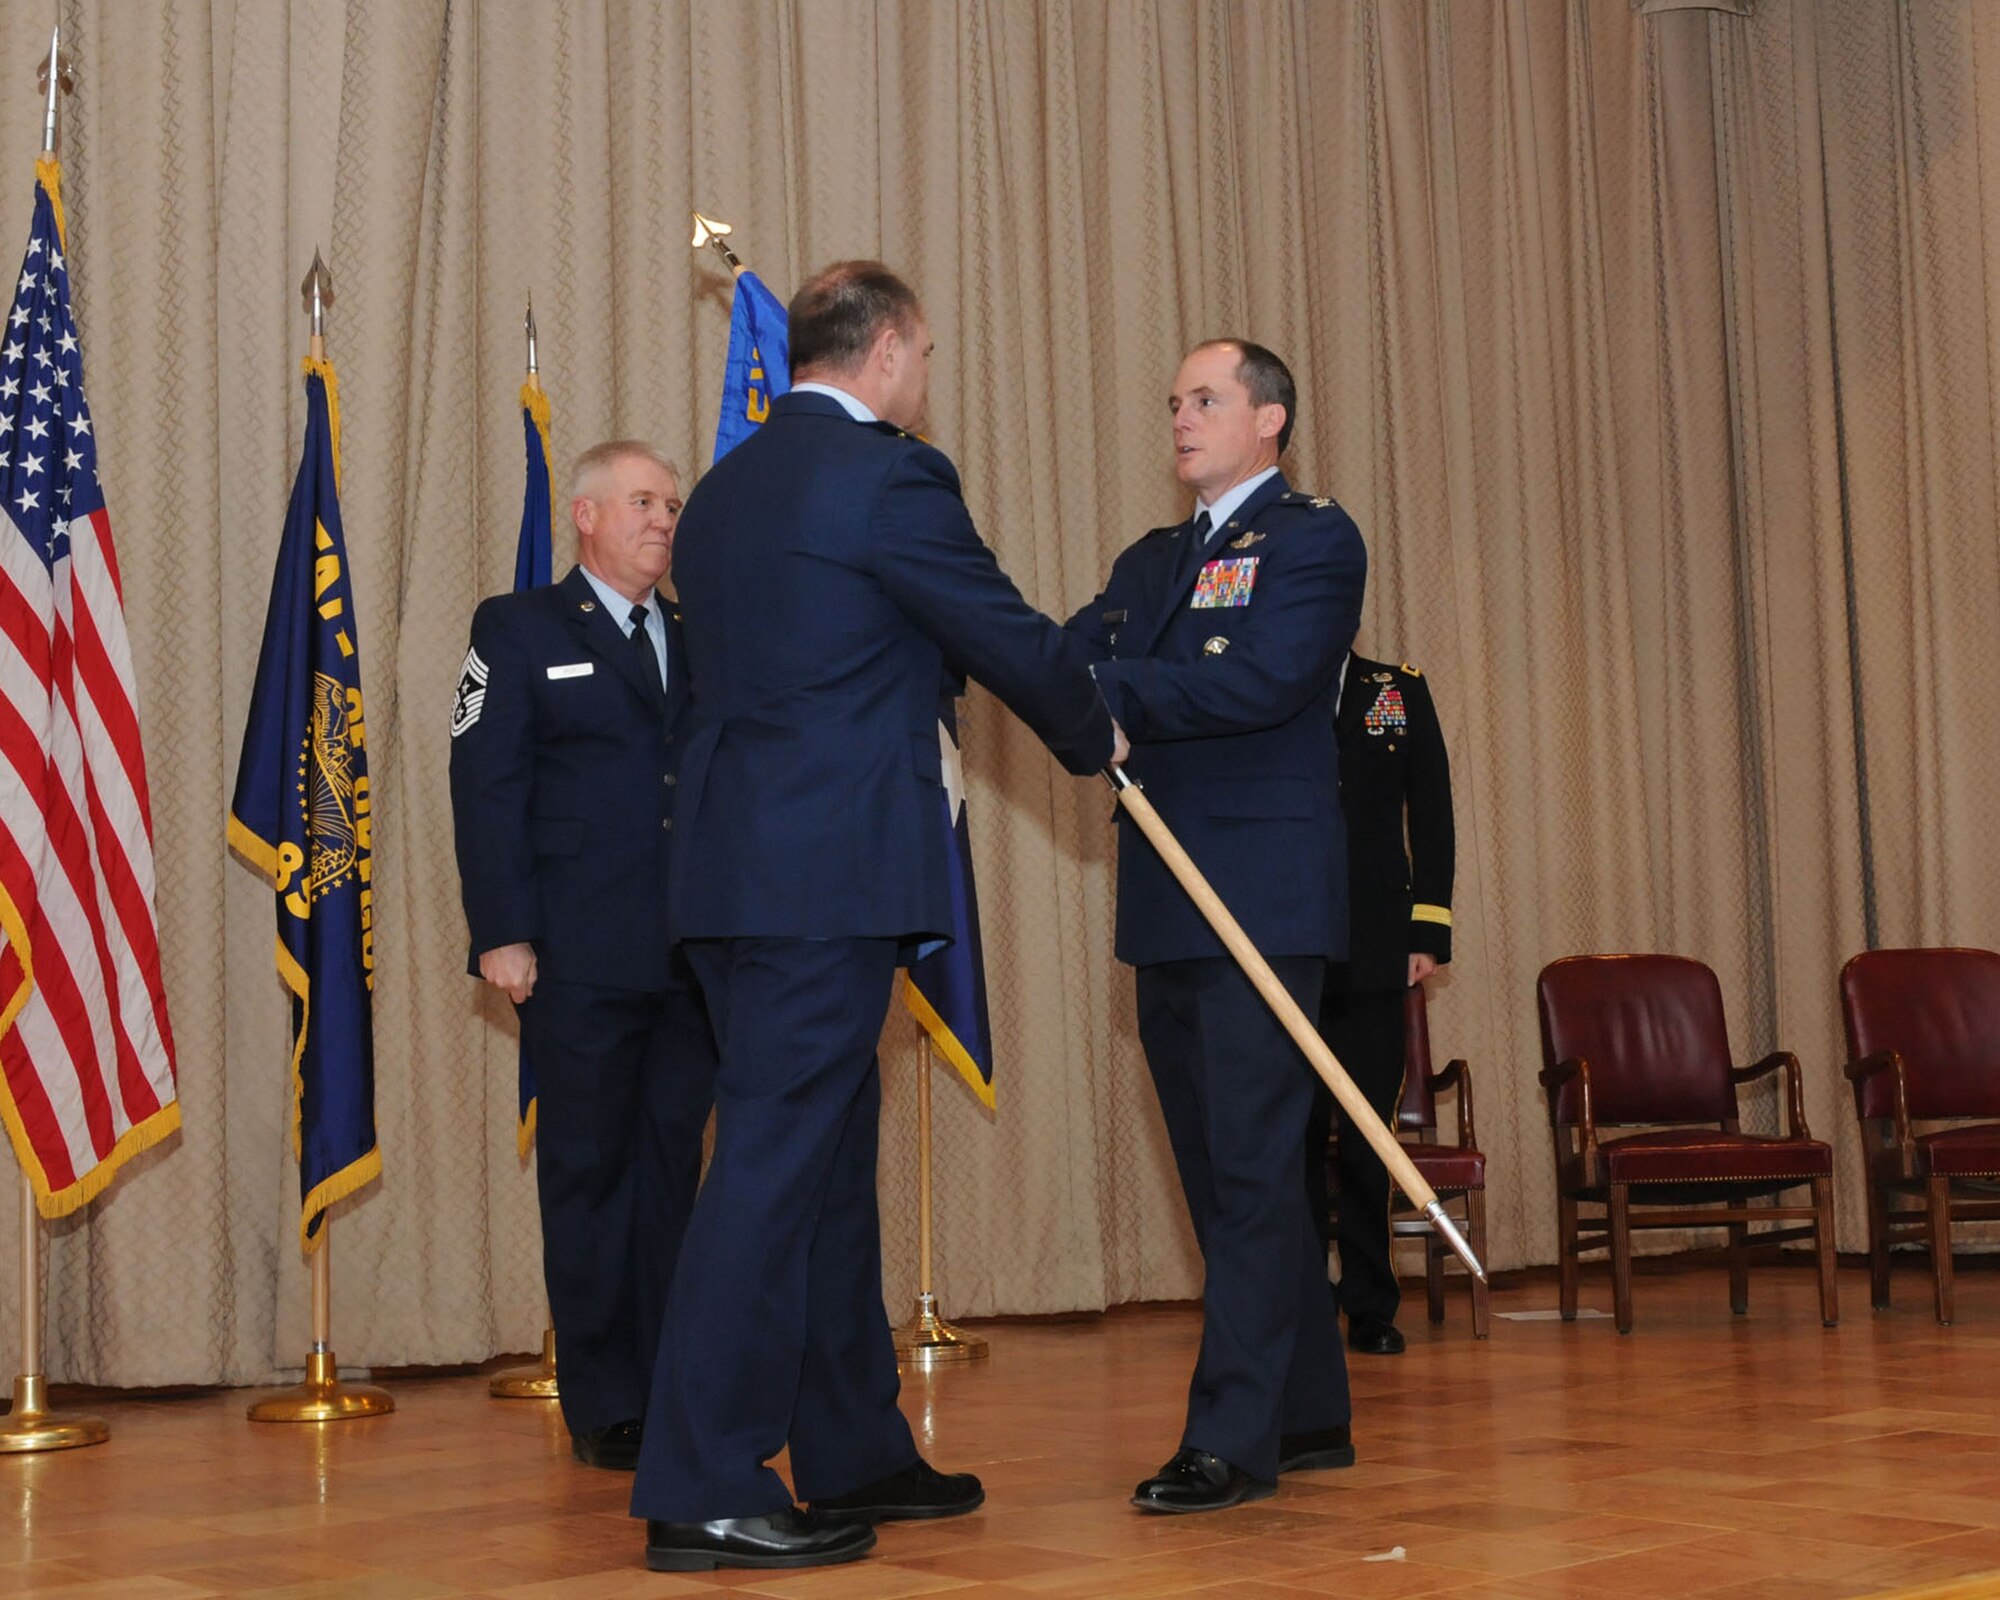 U.S. Air Force Brigadier General Michael Stencel, Oregon Air National Guard Commander, presents the 173rd Fighter Wing guidon to Colonel Kirk Pierce, the incoming 173rd FW Commander, during an Assumption of Command ceremony at Kingsley Field, Klamath Falls, Ore. Jan. 10, 2015.  Pierce has 26 years of military service and was previously assigned as the Director of Plans and Programs for the National Guard Bureau. (U.S. Air National Guard photo by Senior Airman Penny Snoozy/Released)